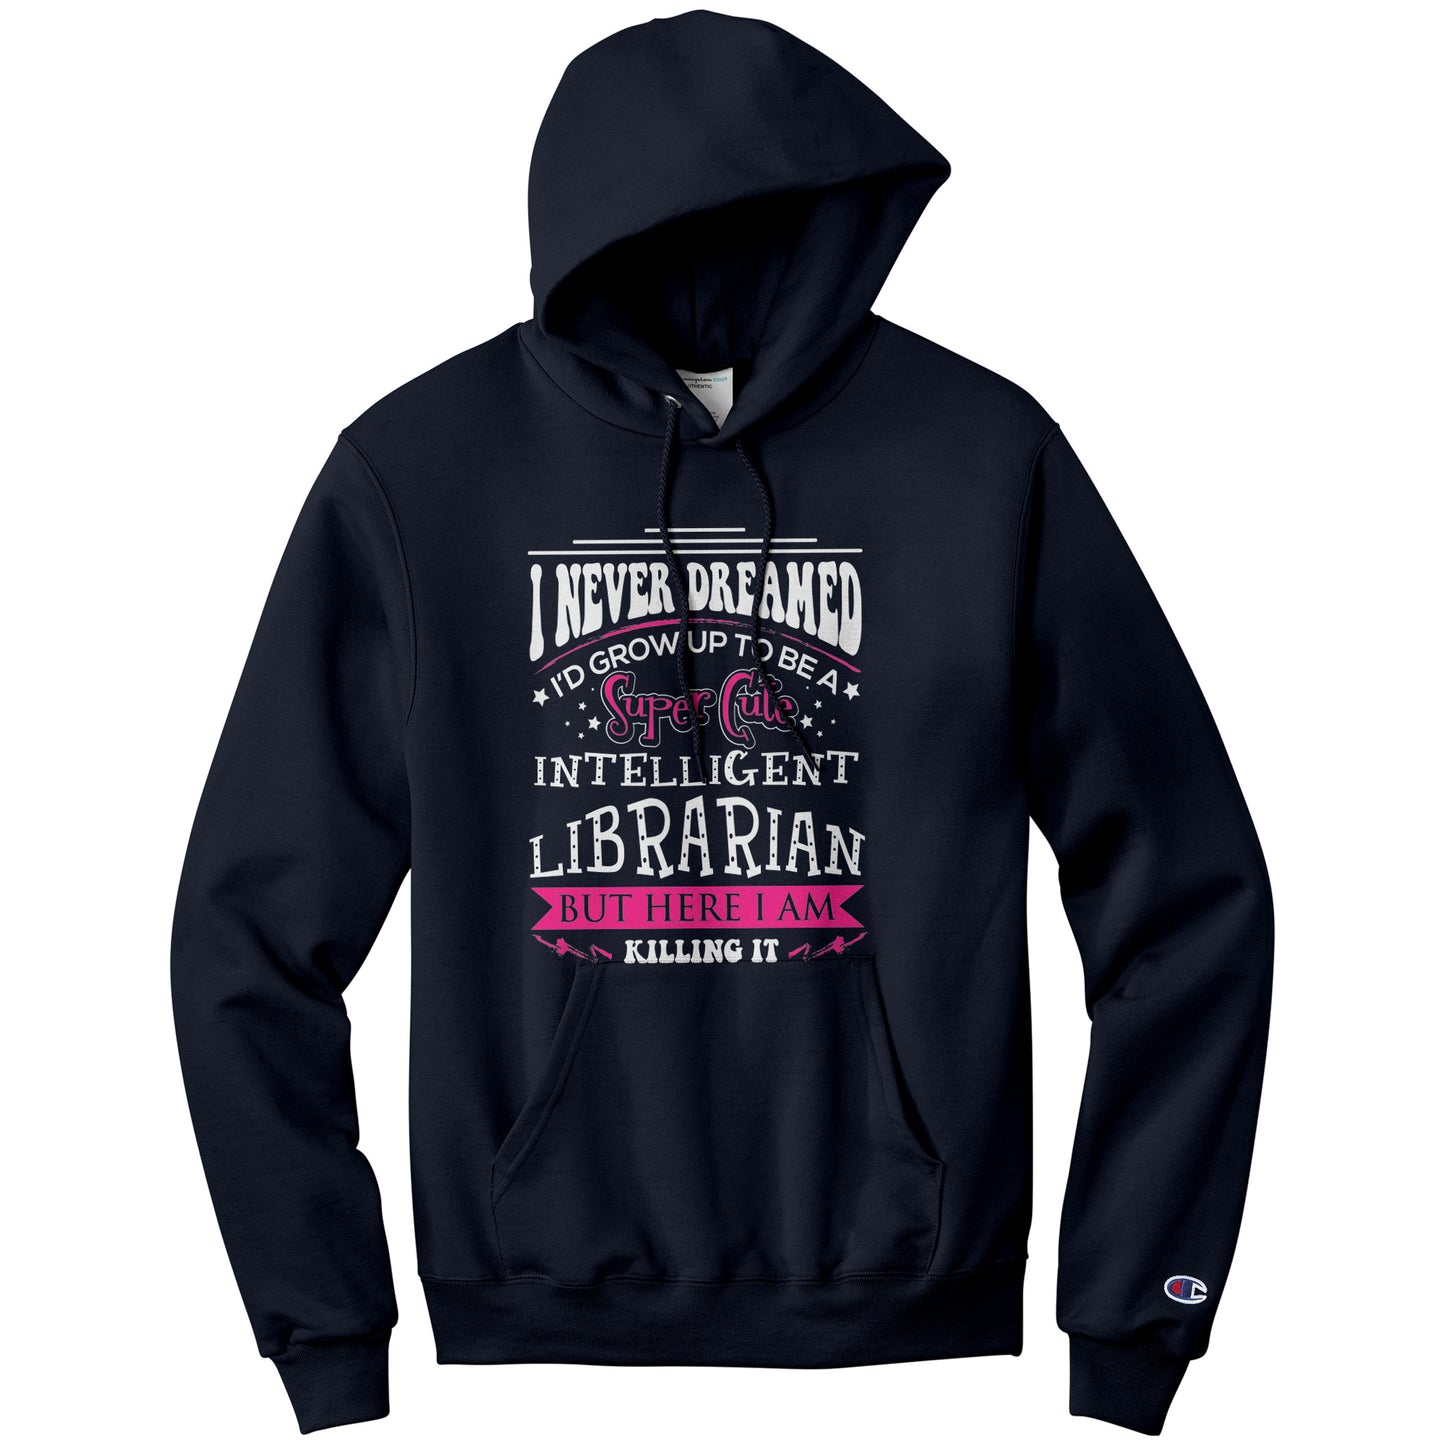 I Never Dreamed I'd Grow Up To Be A Super Cute Intelligent Librarian But Here I Am Killing It | Hoodie